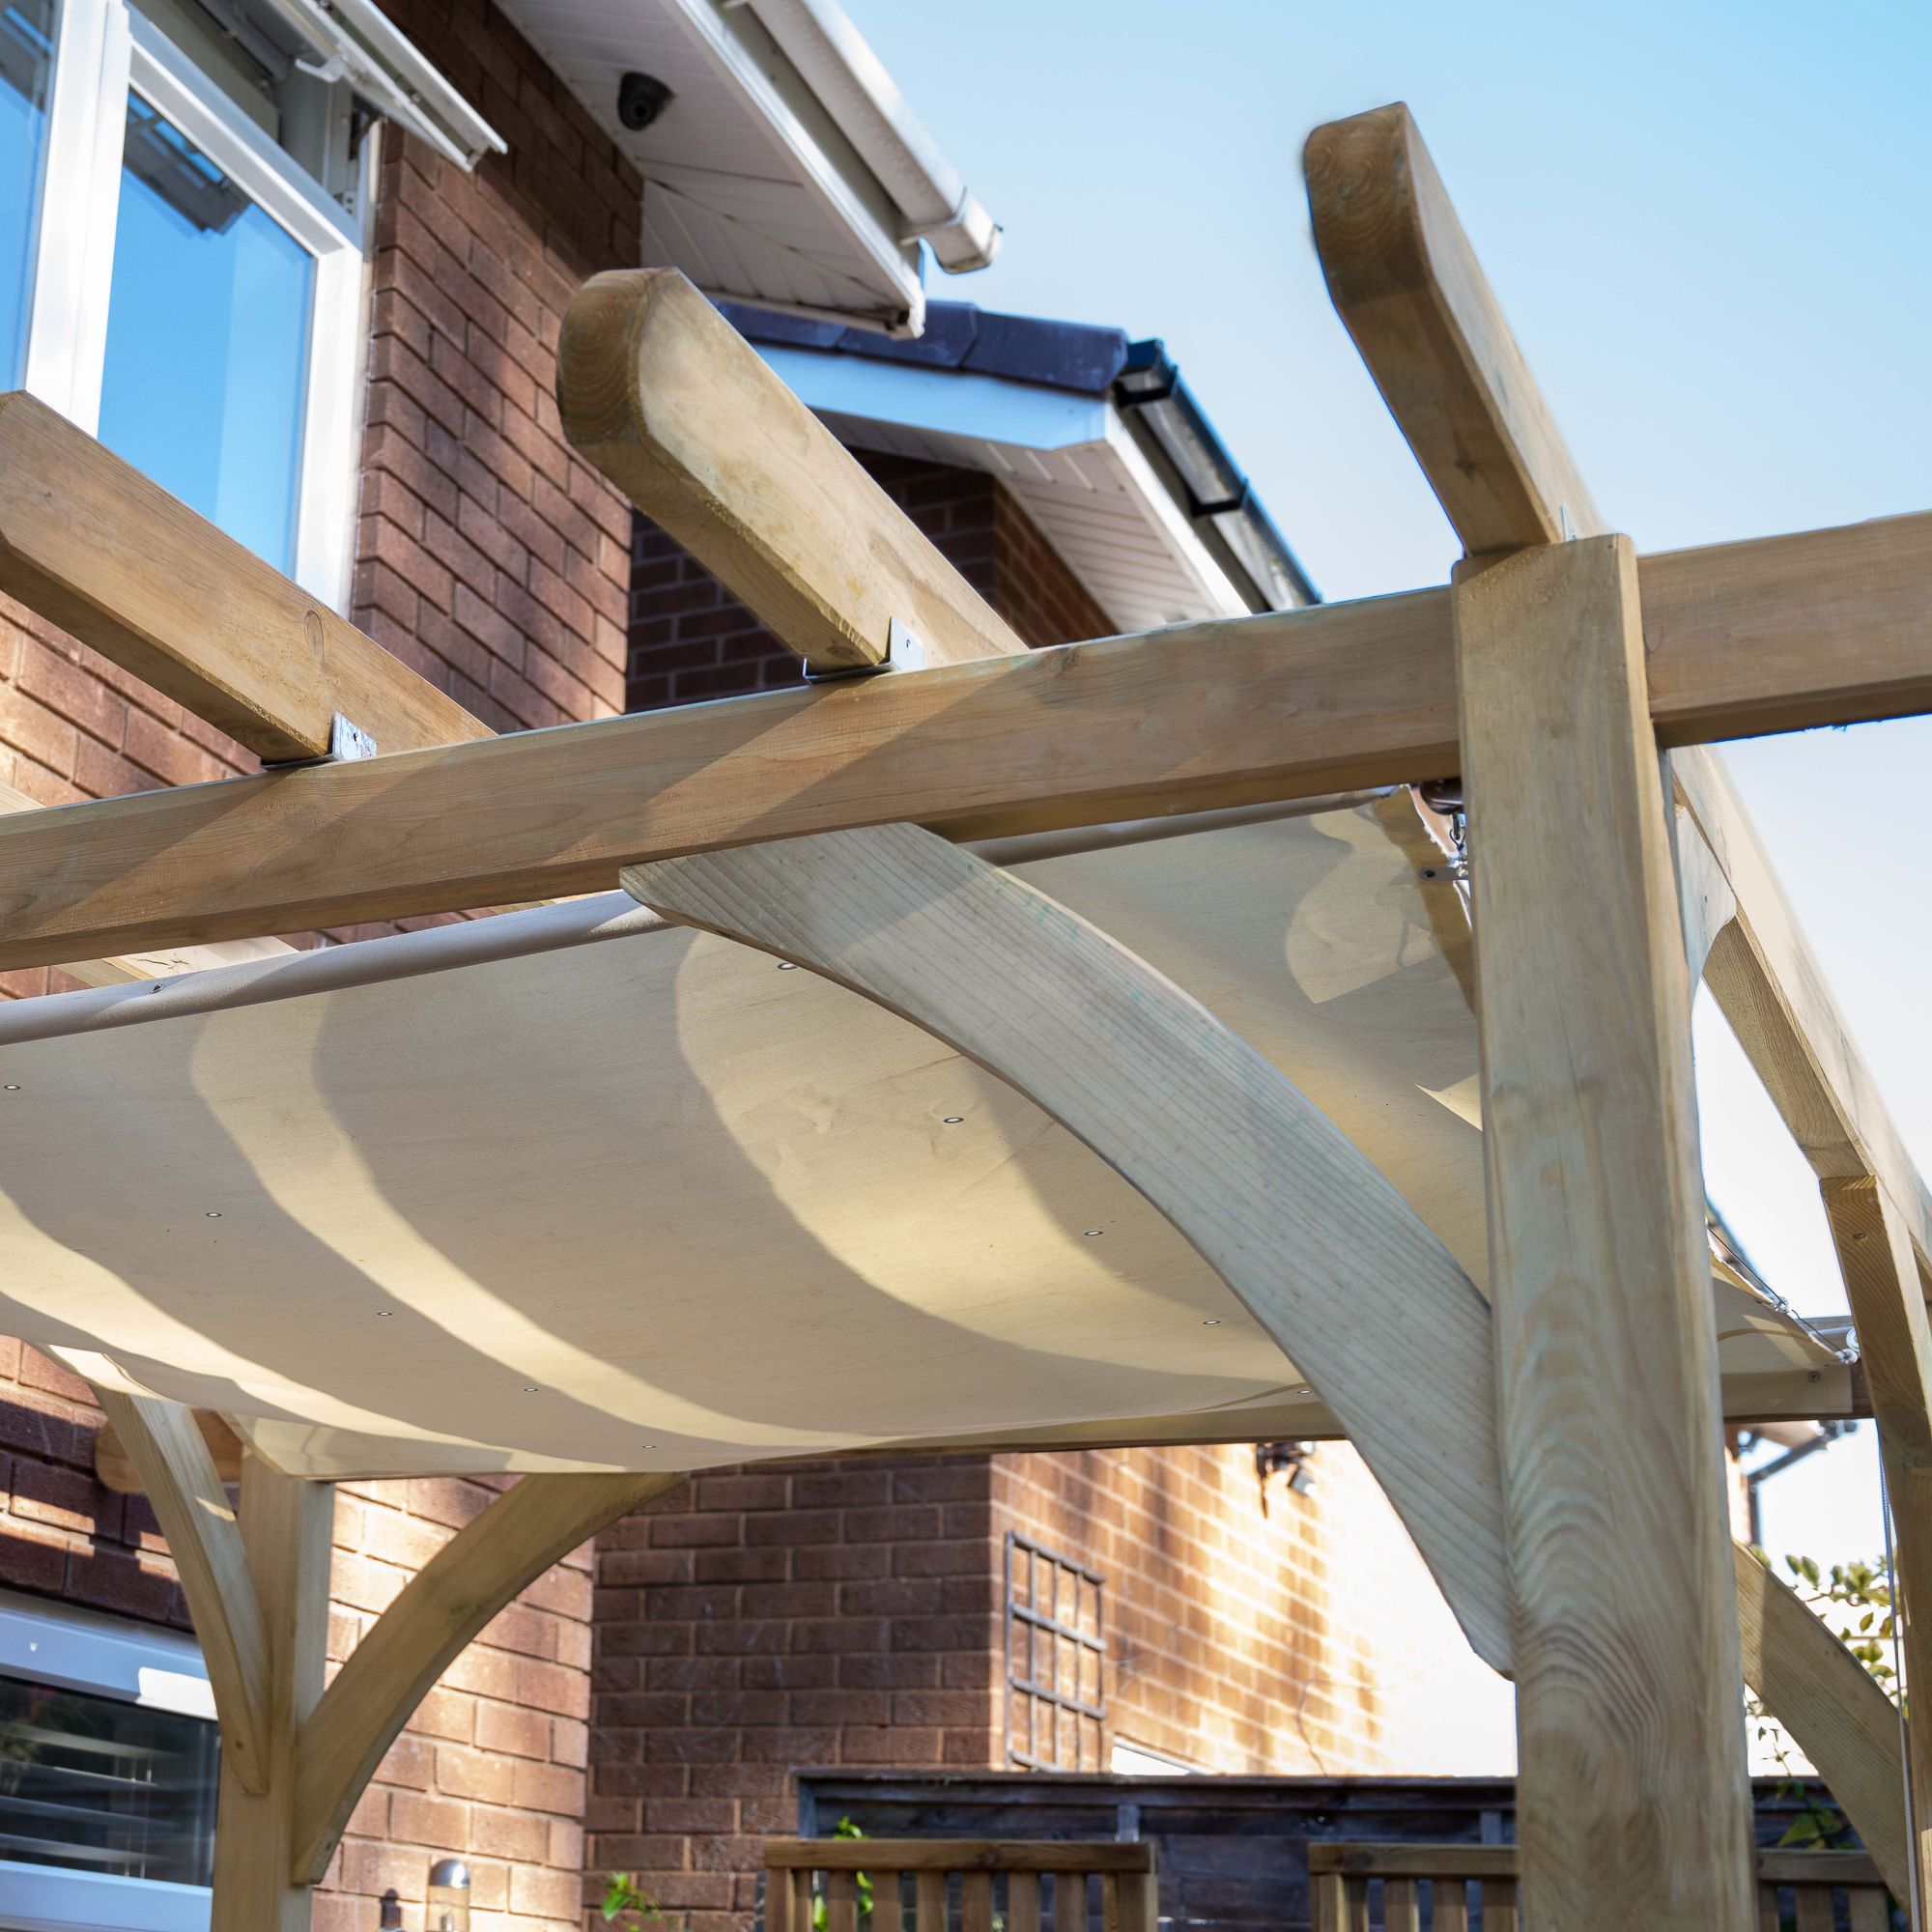 Forest Garden Ultima Cream Pergola & decking kit, x4 Post (H) 2.4m x (W) 2.4m - Canopy included